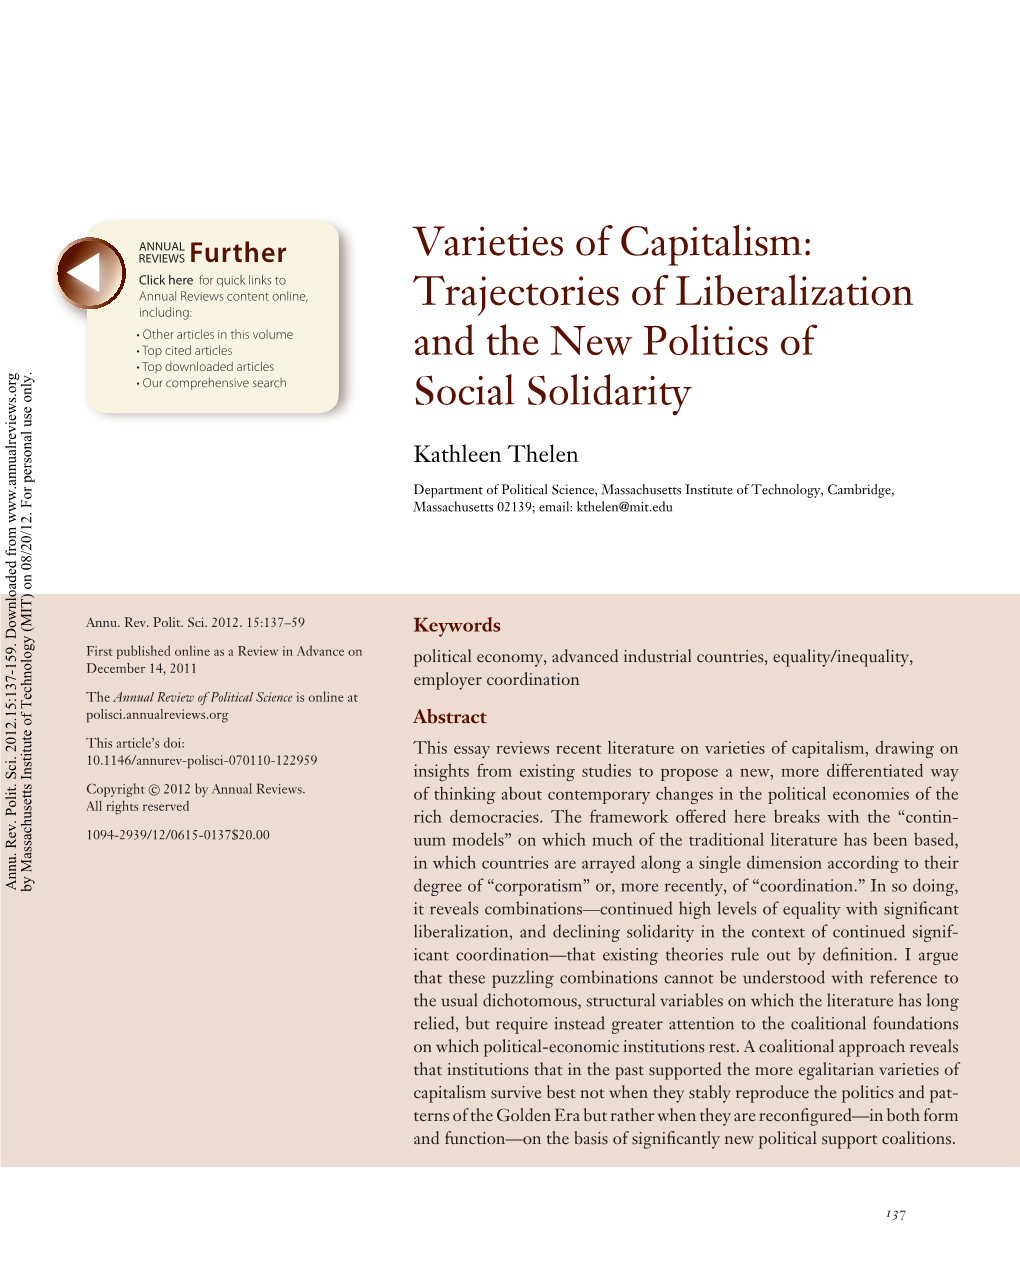 Varieties of Capitalism: Trajectories of Liberalization and the New Politics of Social Solidarity